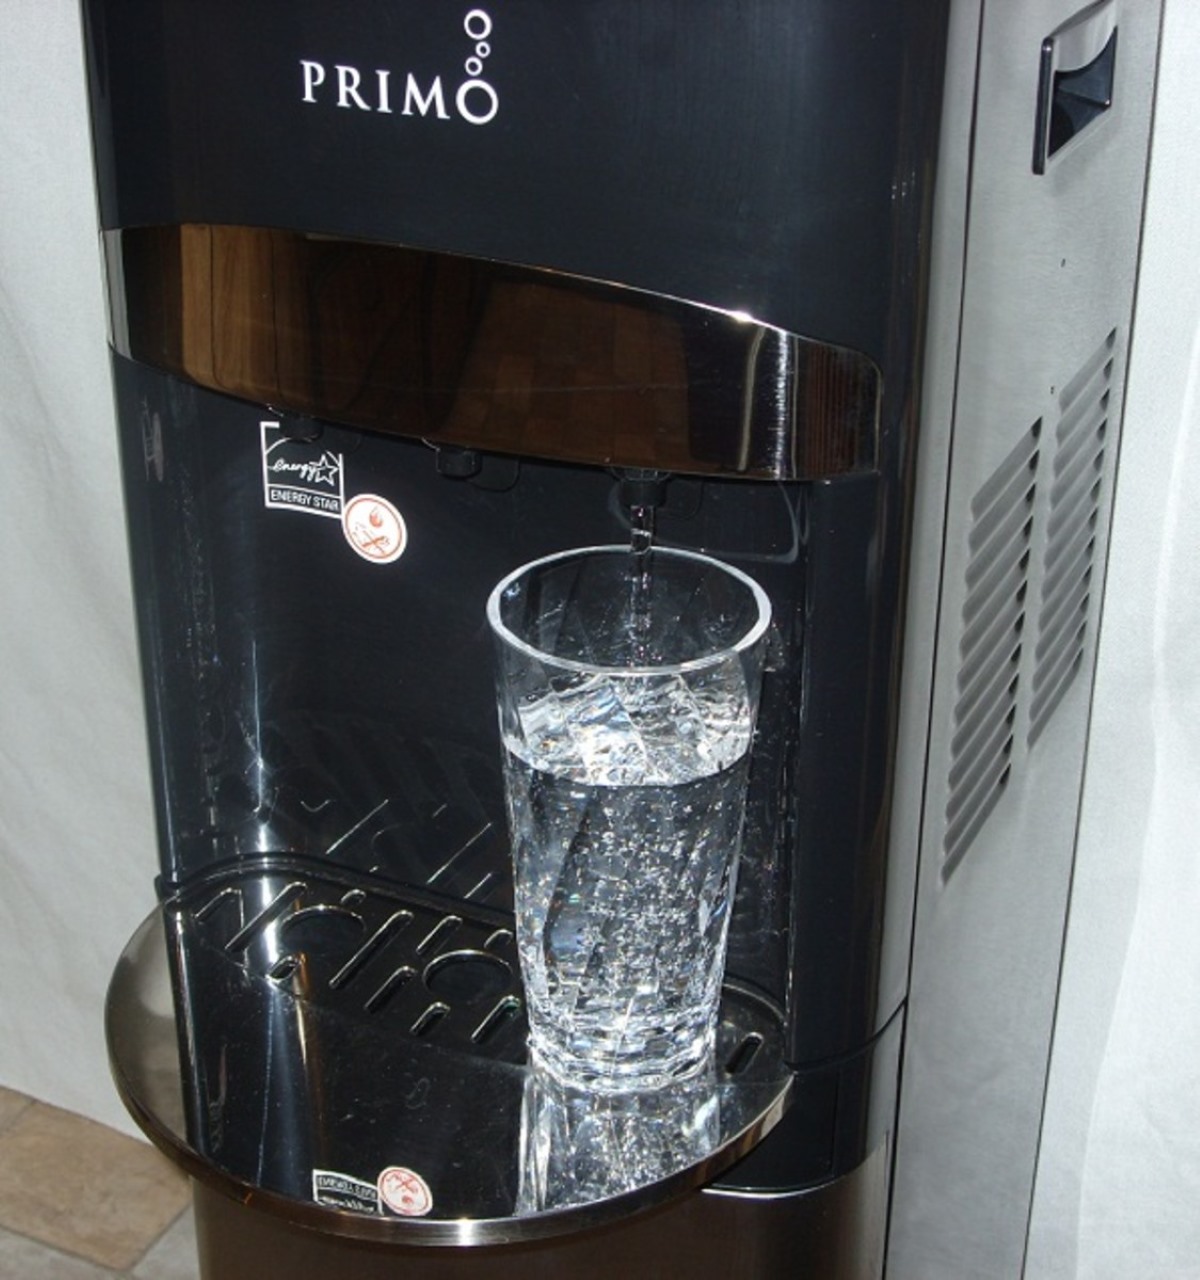 How Hot Is Water From Water Dispenser